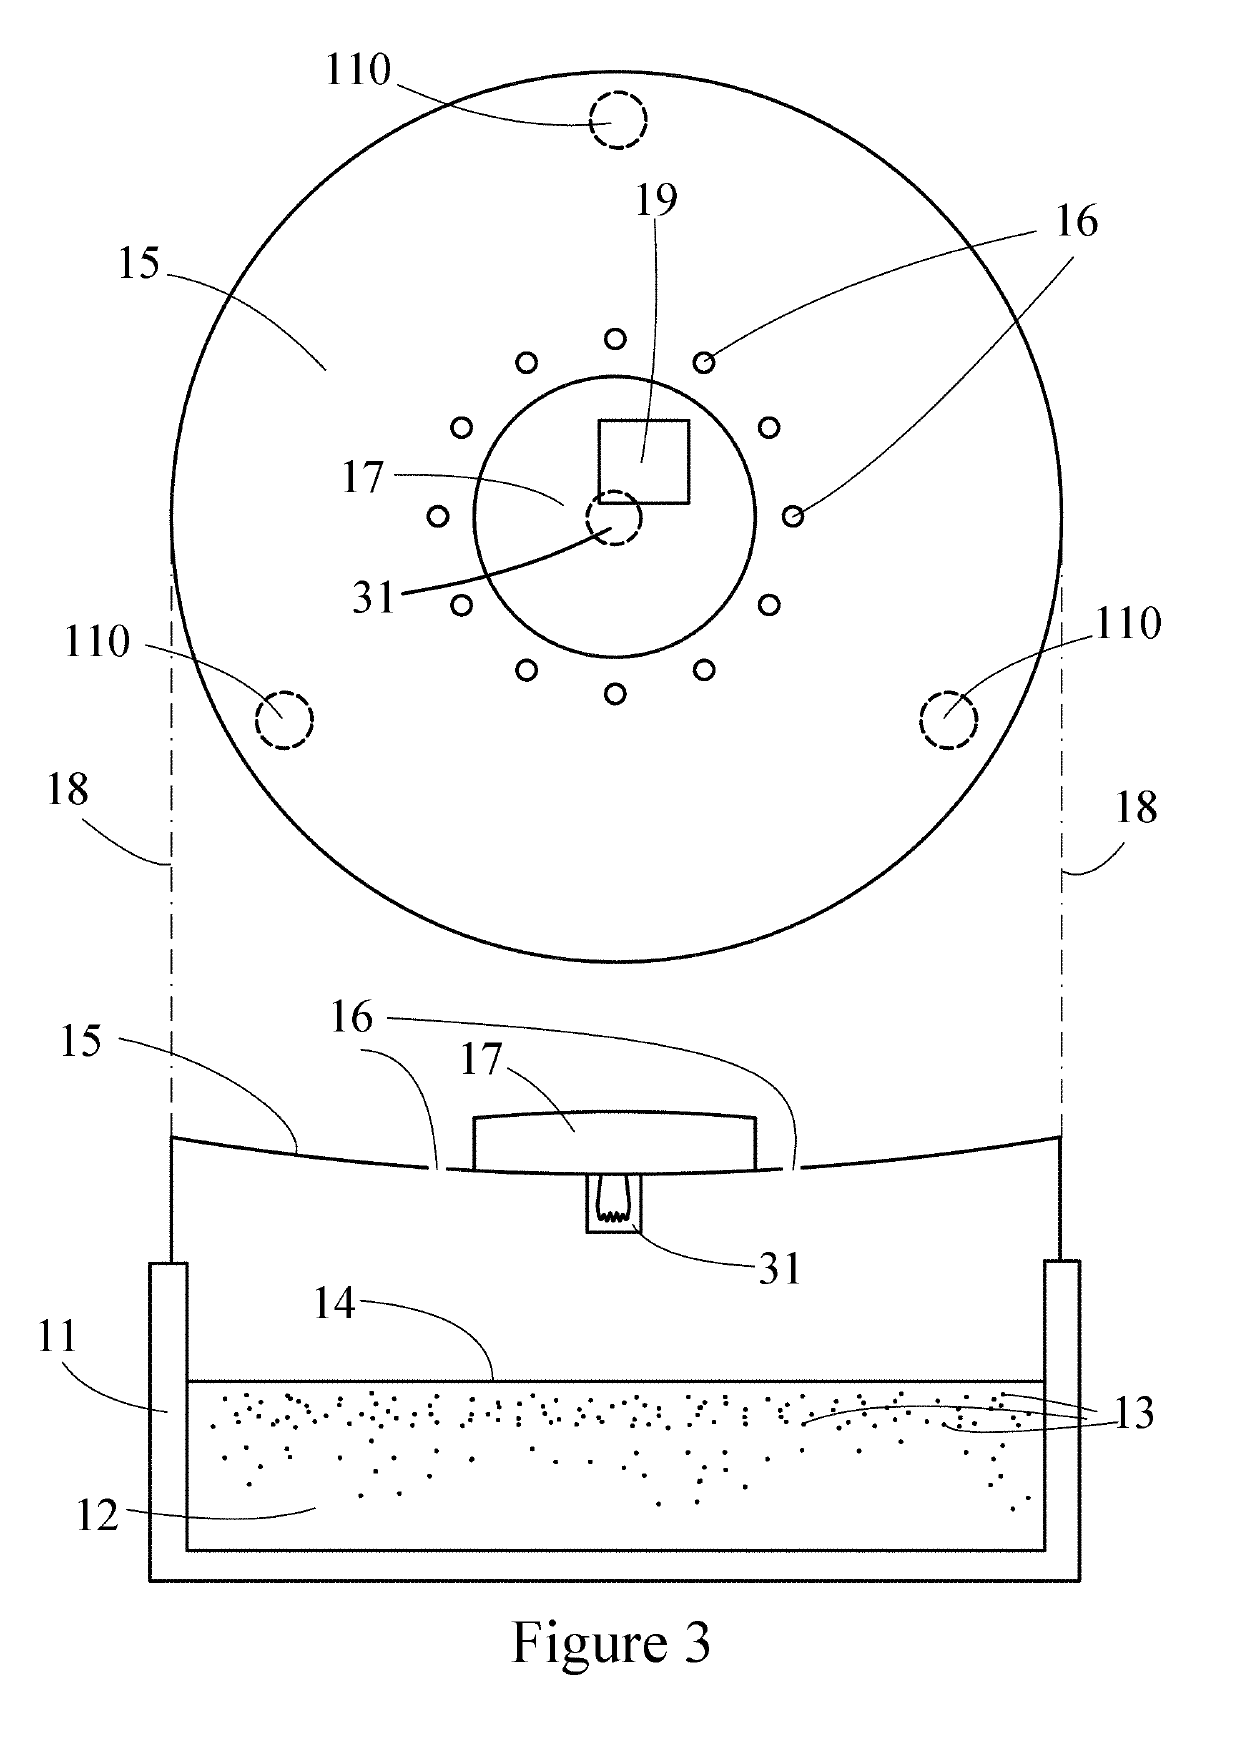 Skeeter EaterTM Apparatus and Method for Concentrating then Killing Mosquitos